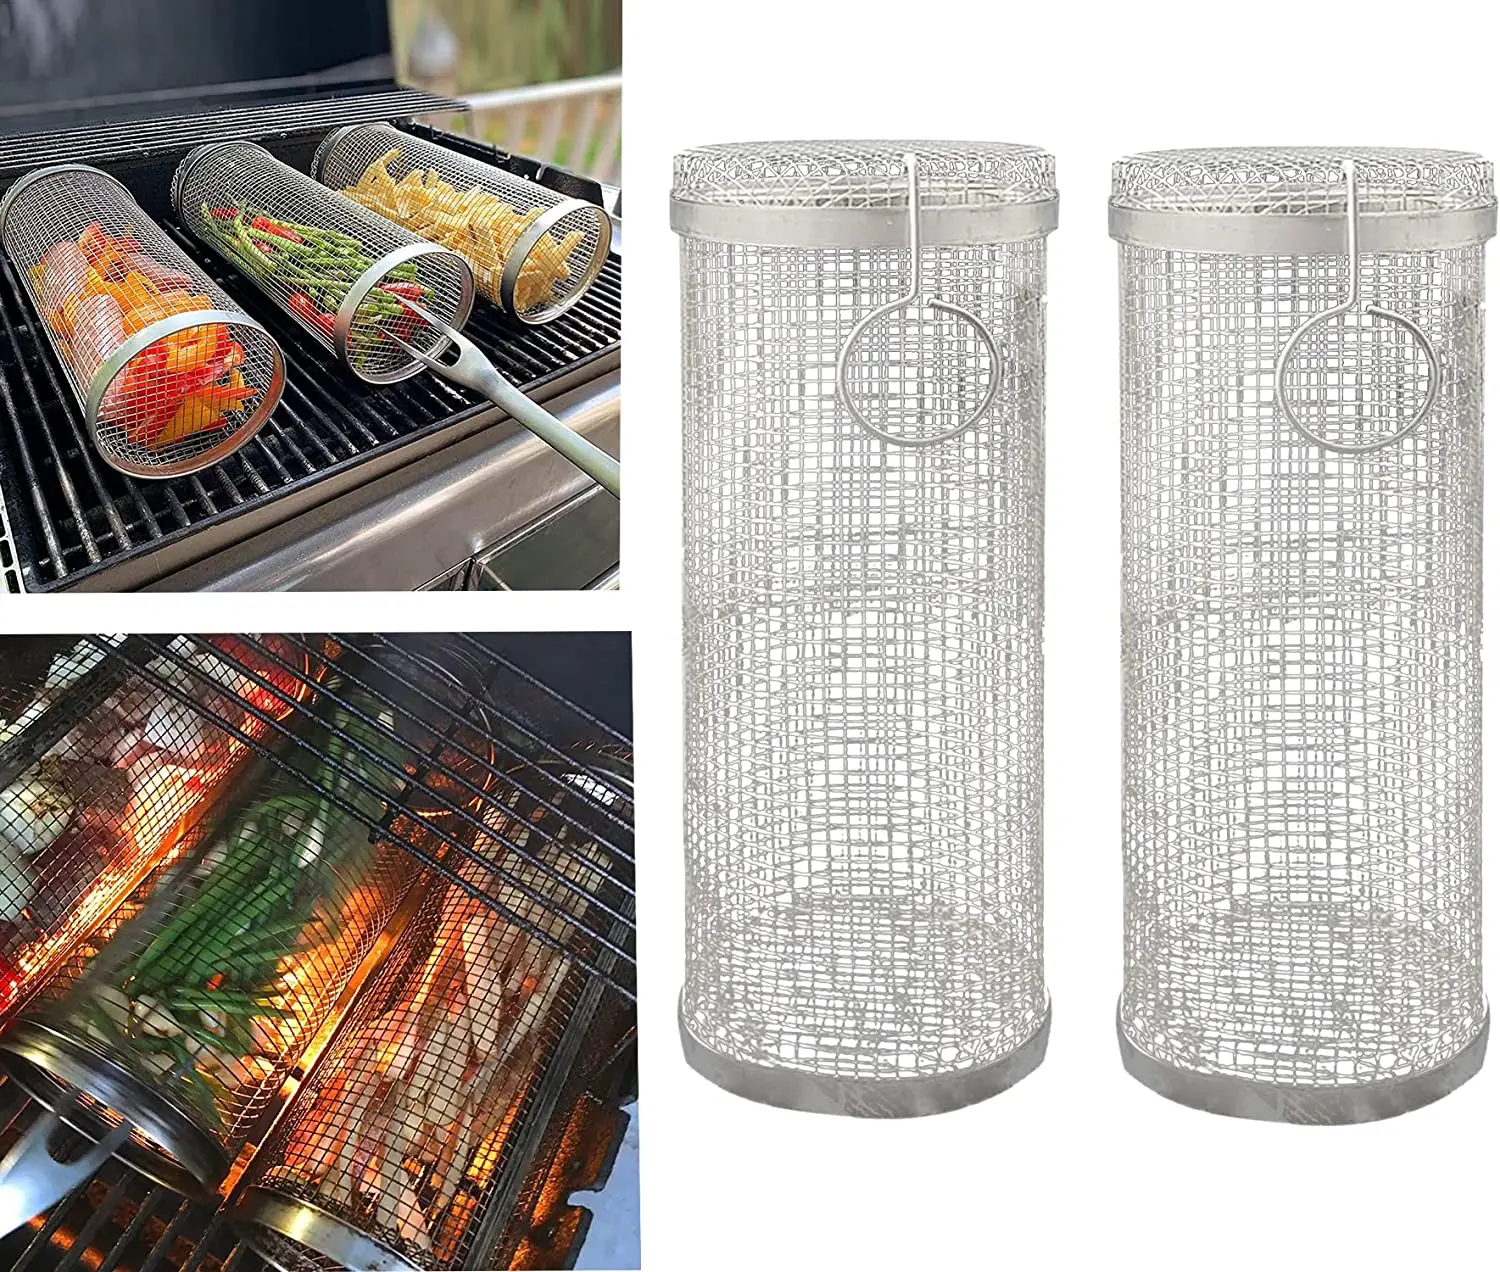 

Barbecue Cooking Grill Grate Stainless Steel Outdoor Picnic Camping BBQ Drum Grilling Basket Campfire Grid Kitchen Tool Cookware